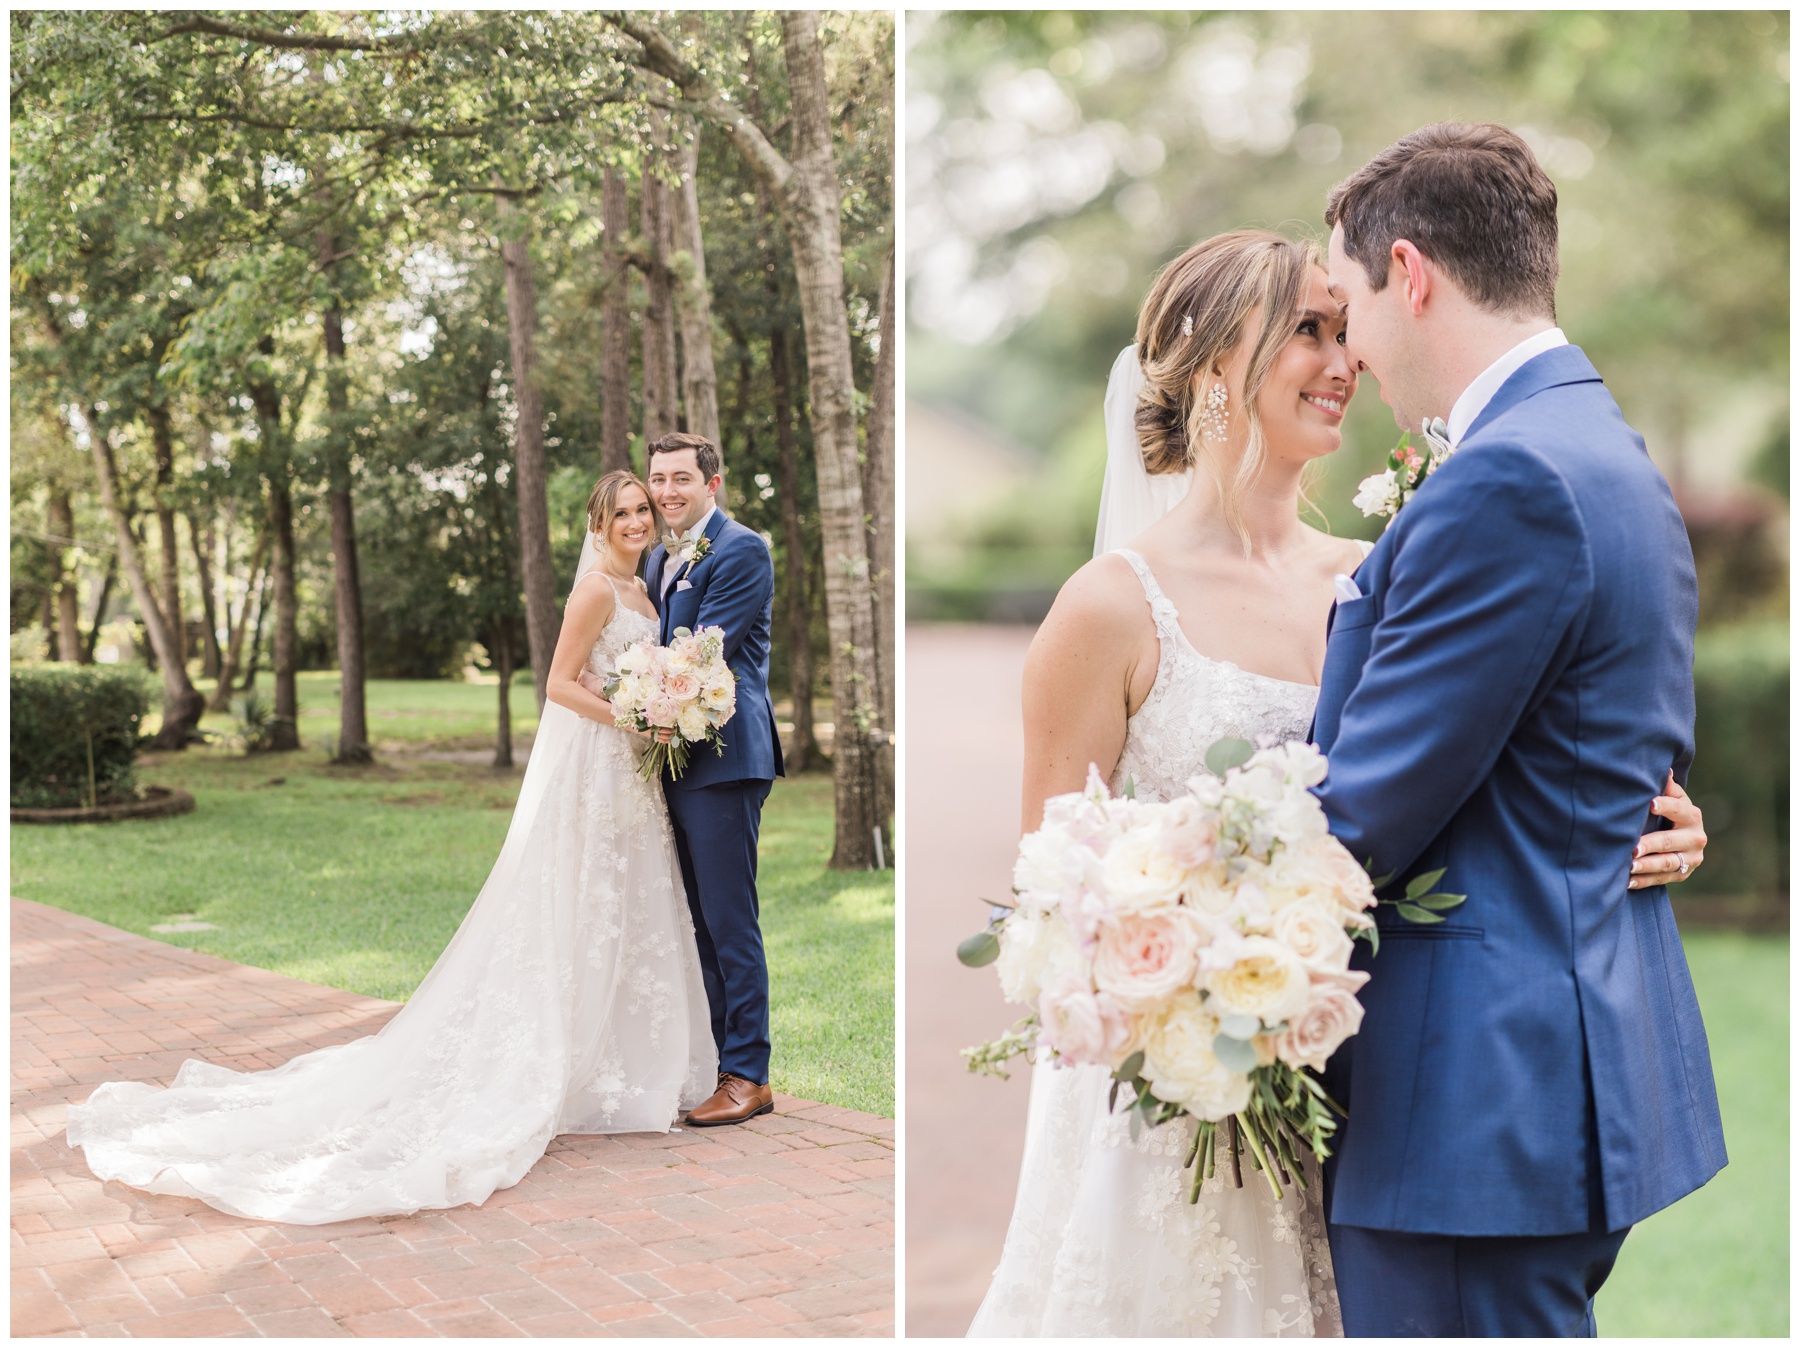 Bridal portraits at The Springs in Cypress